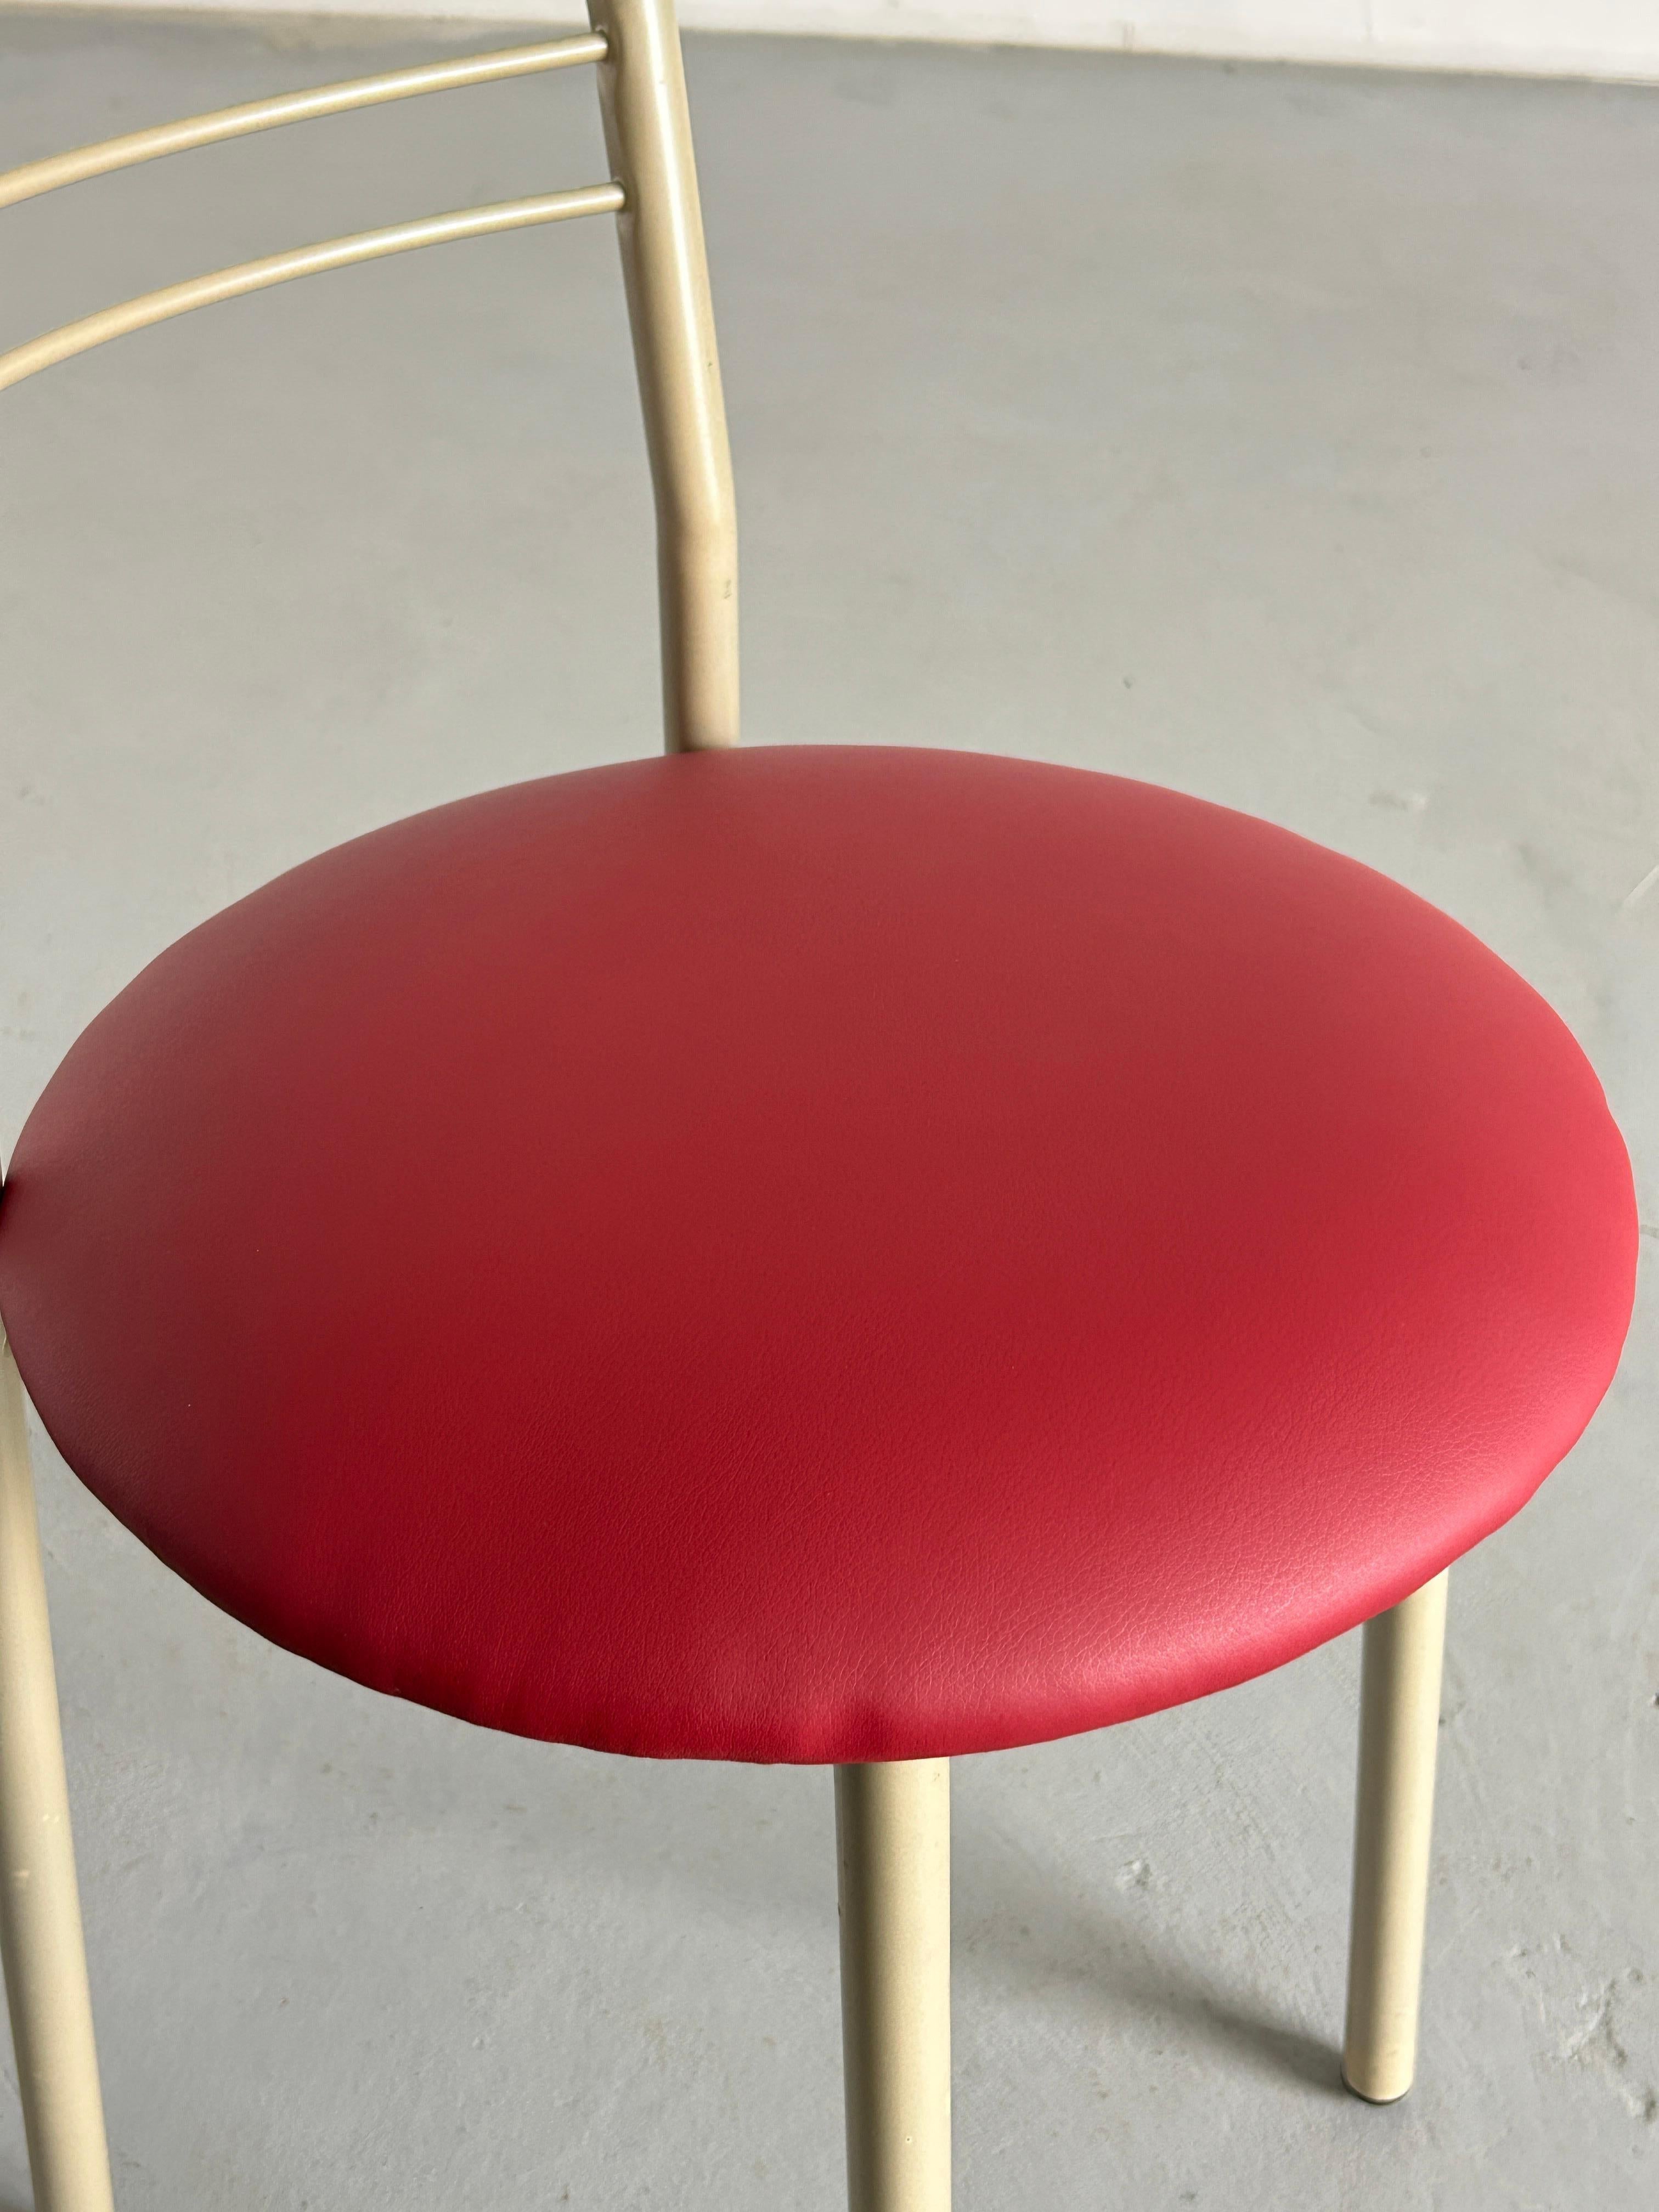 Postmodern Memphis Style Chair with Red Faux Leather Upholstery, 1980s Italy For Sale 4